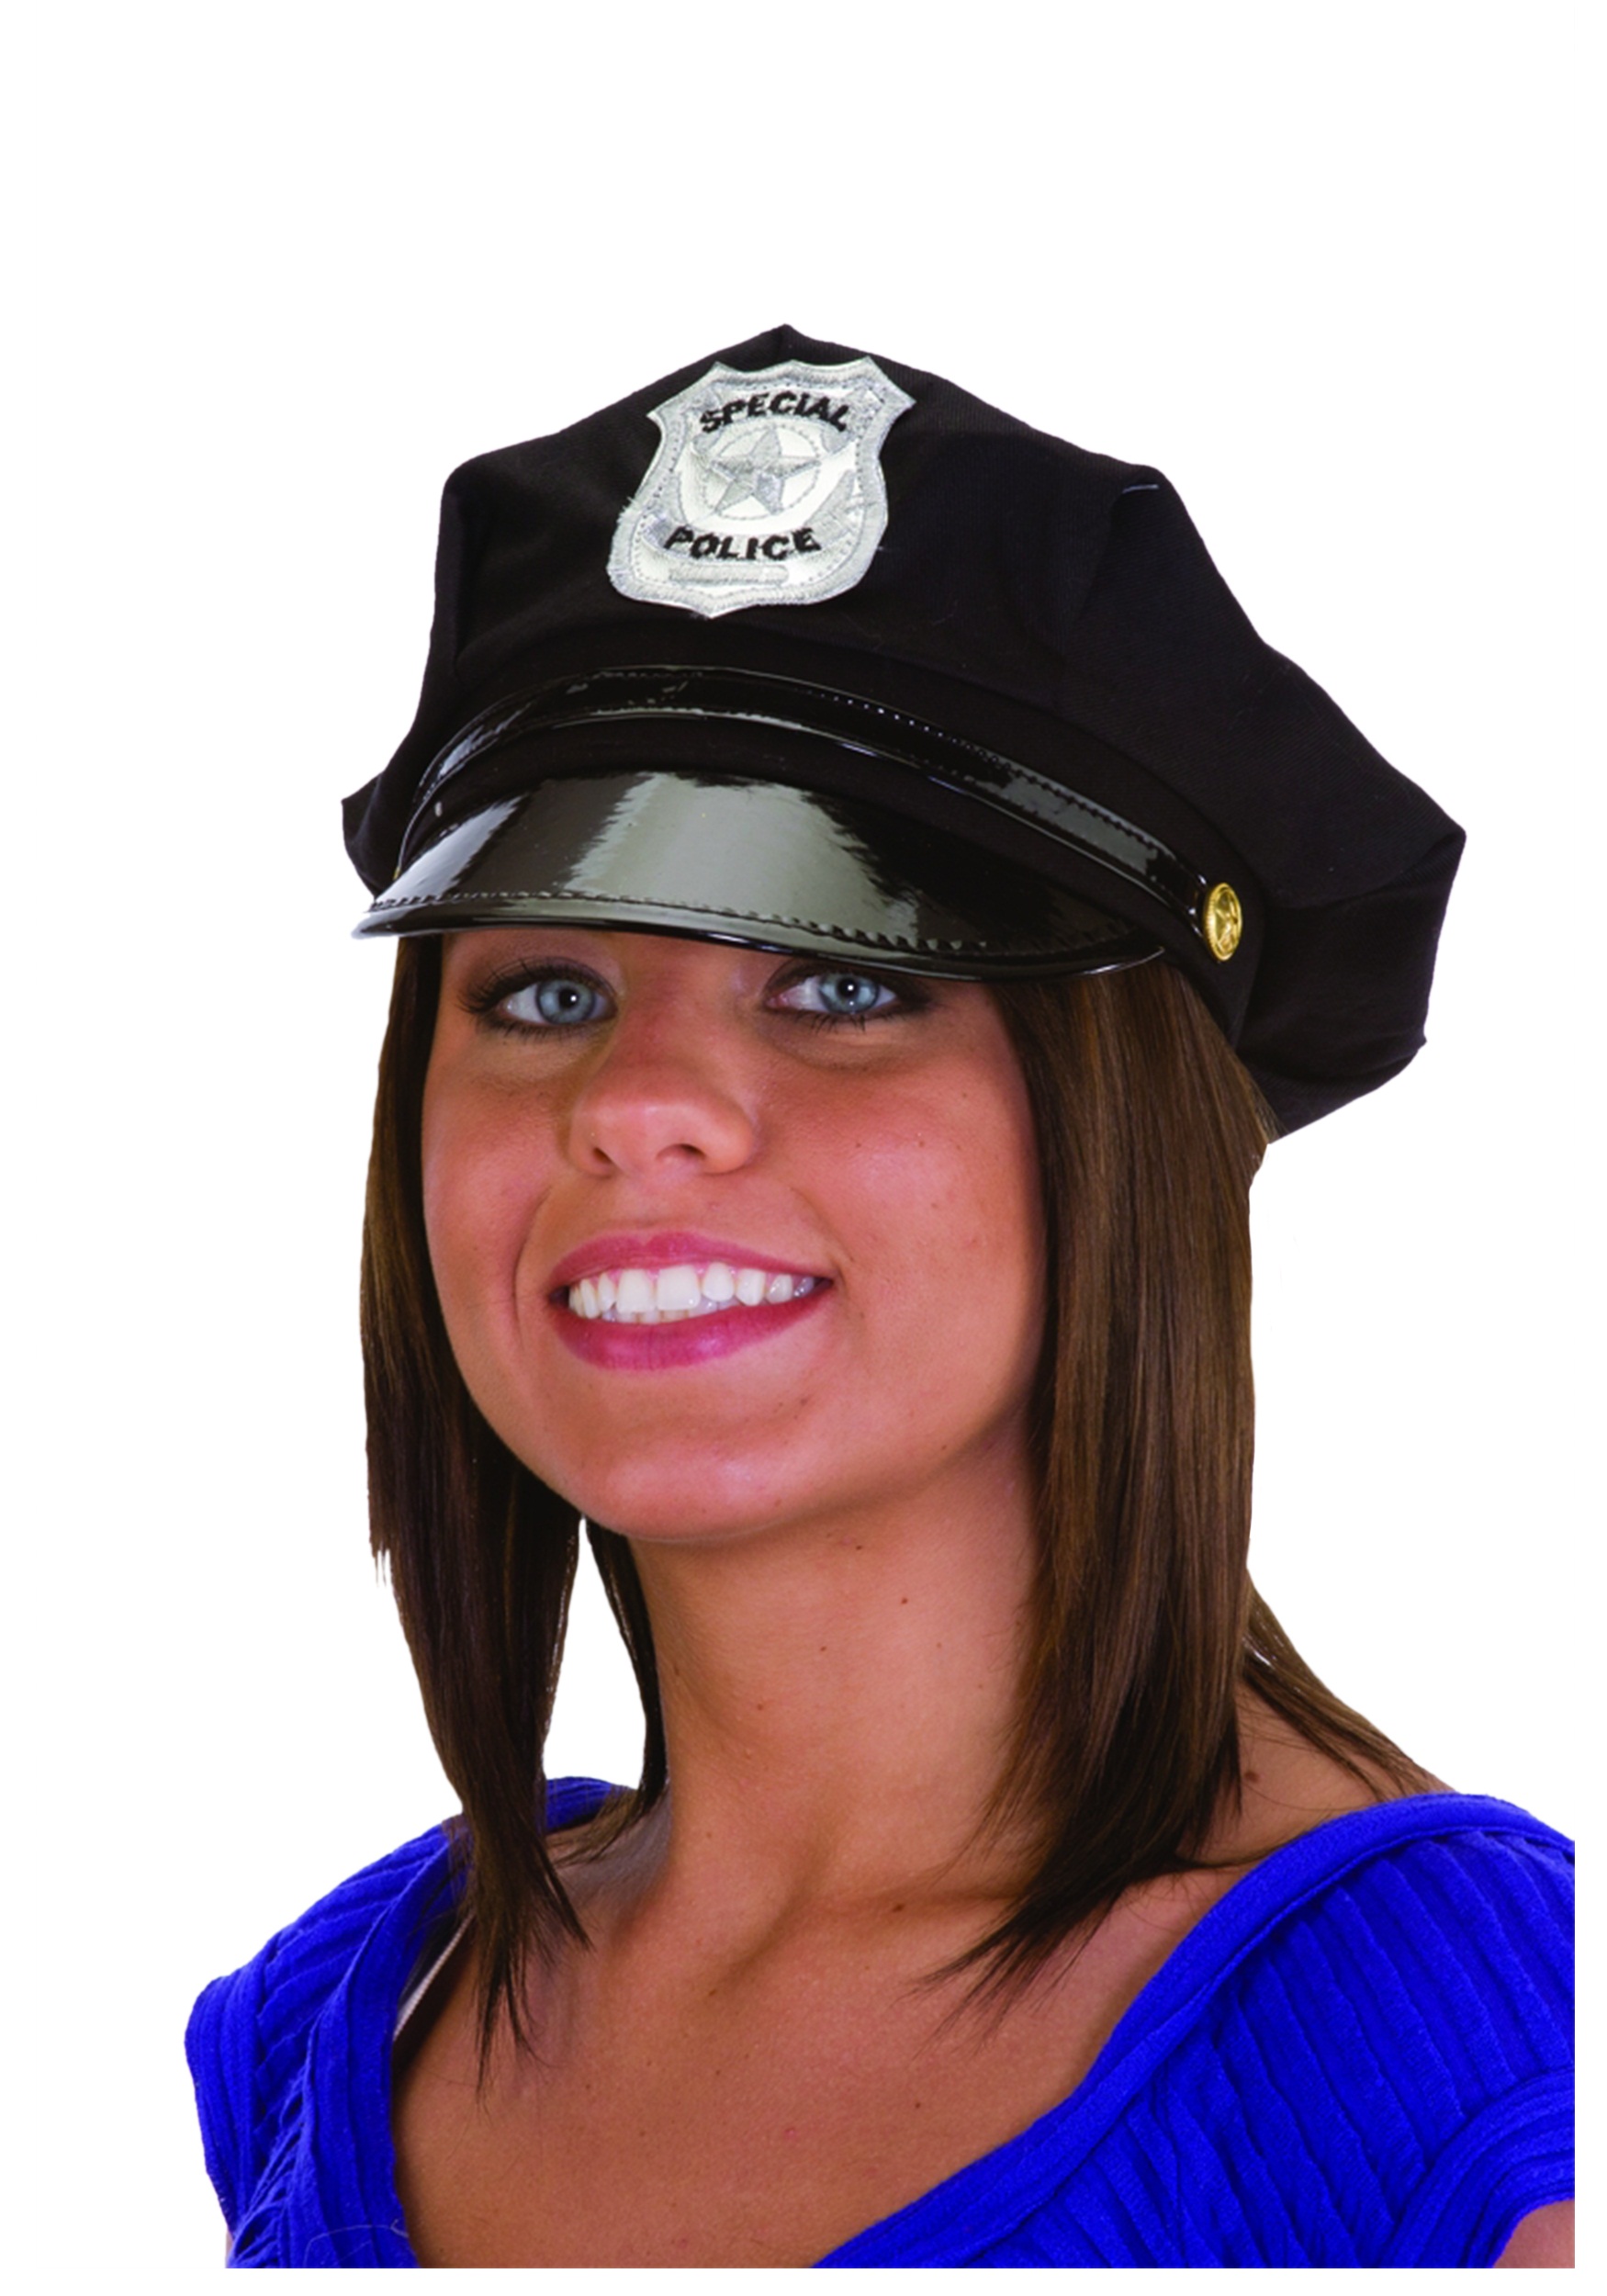 Details about   Policeman Cap Peak Police Cop Hat For Adult Fancy Dress Costume Accessory 